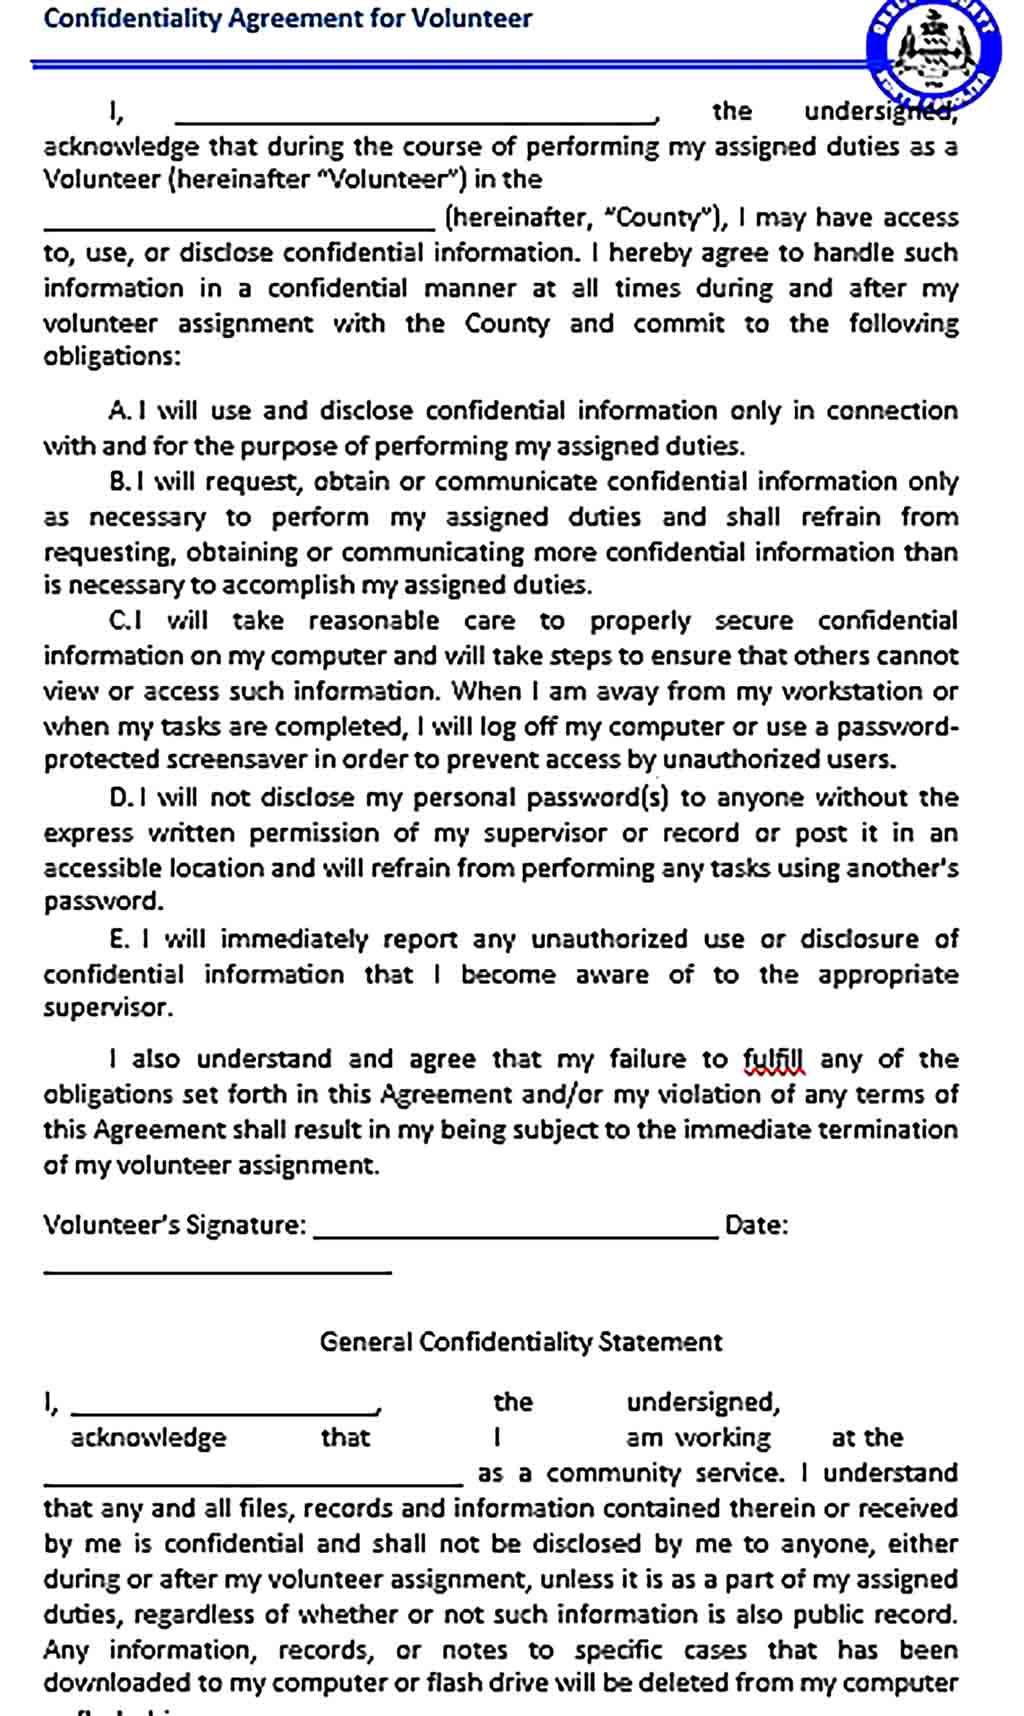 Sample Computer Confidentiality Agreement for Volunteer